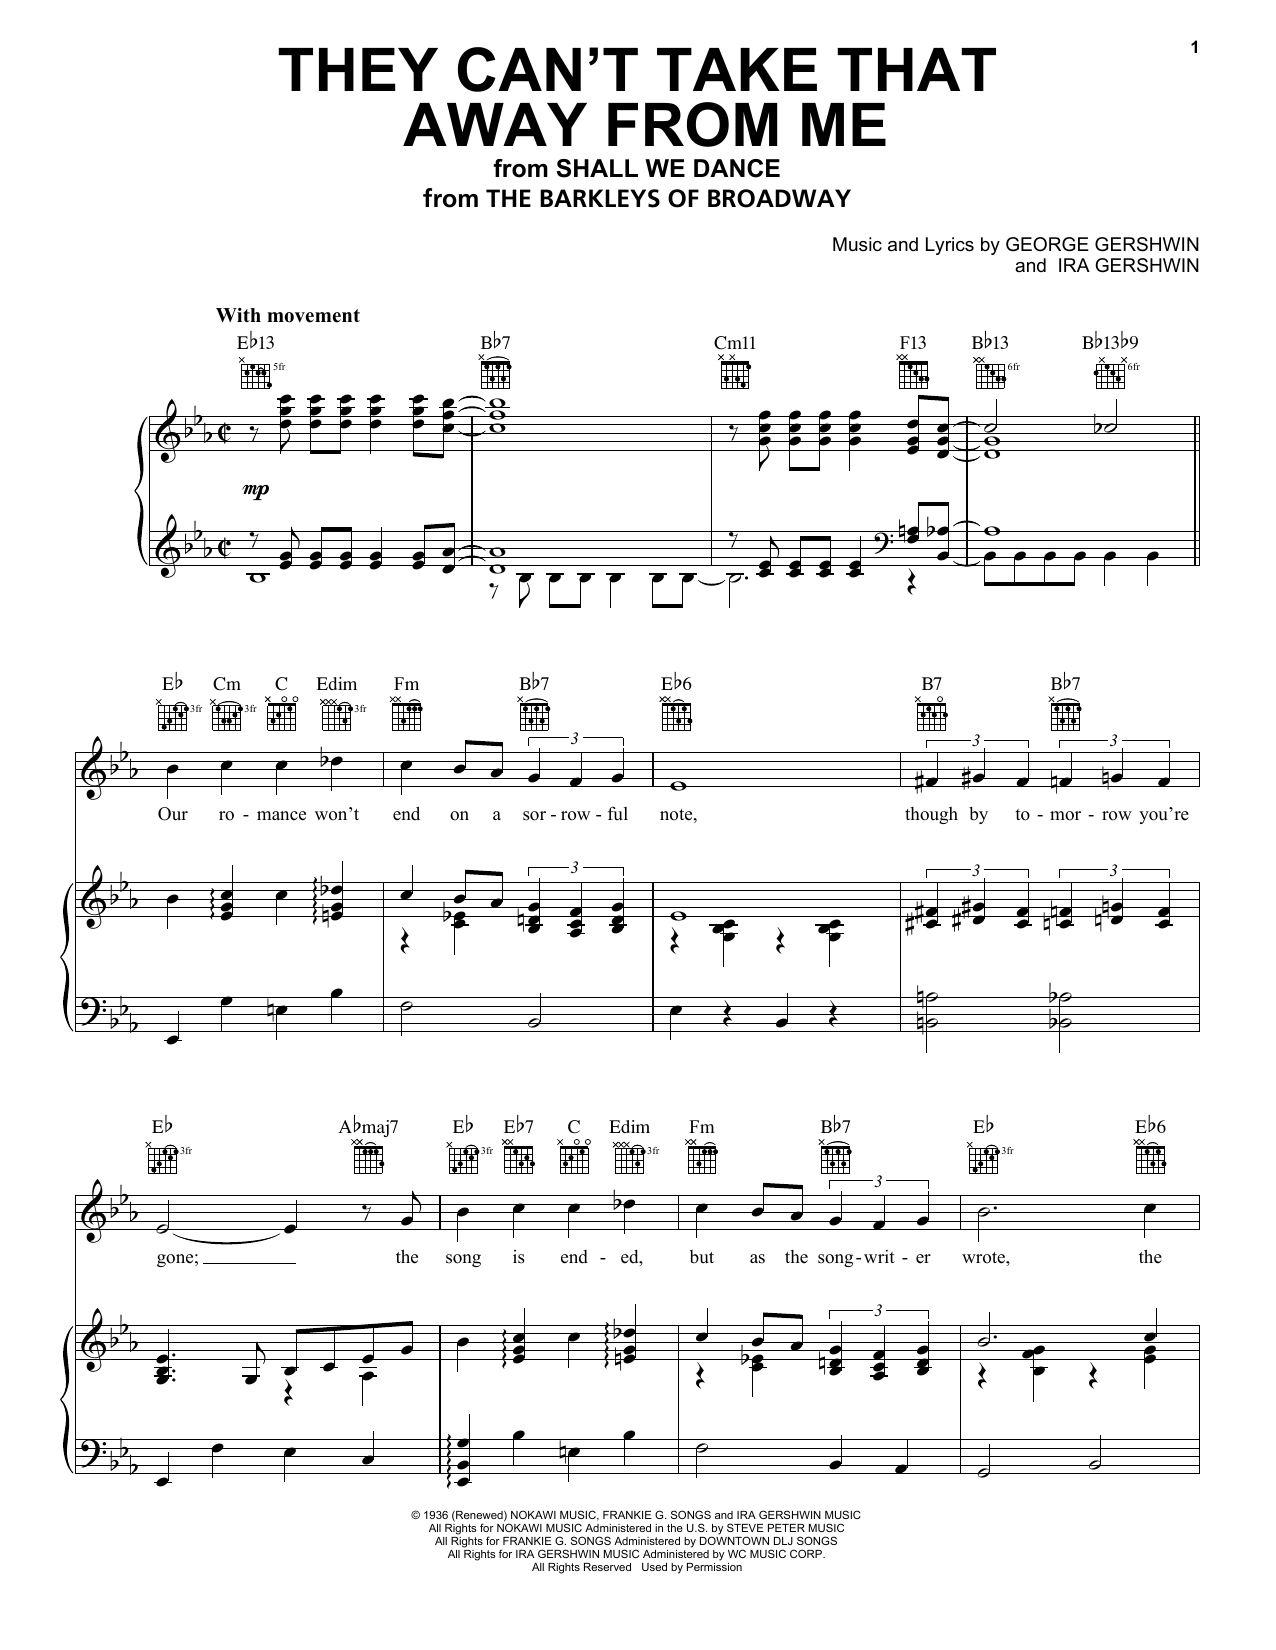 Rod Stewart They Can't Take That Away From Me sheet music notes and chords. Download Printable PDF.